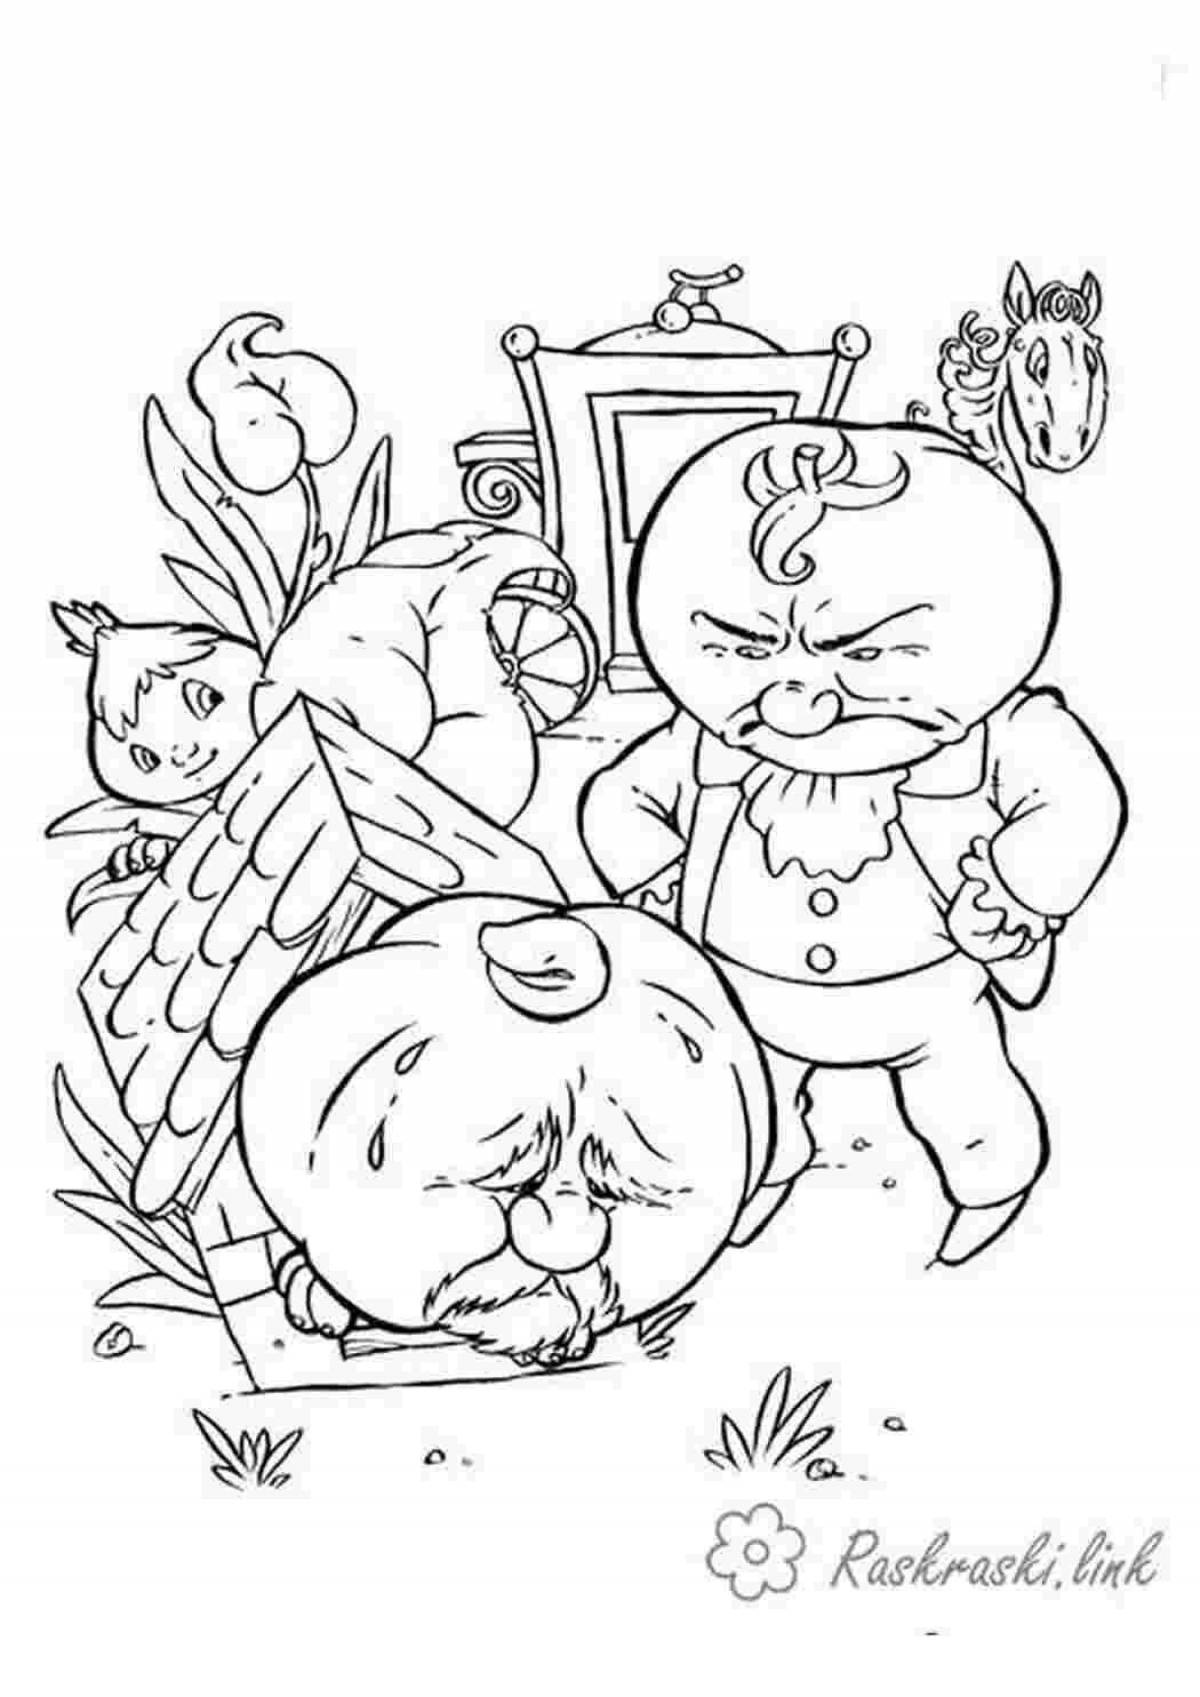 Cheerful chipollino coloring book for children